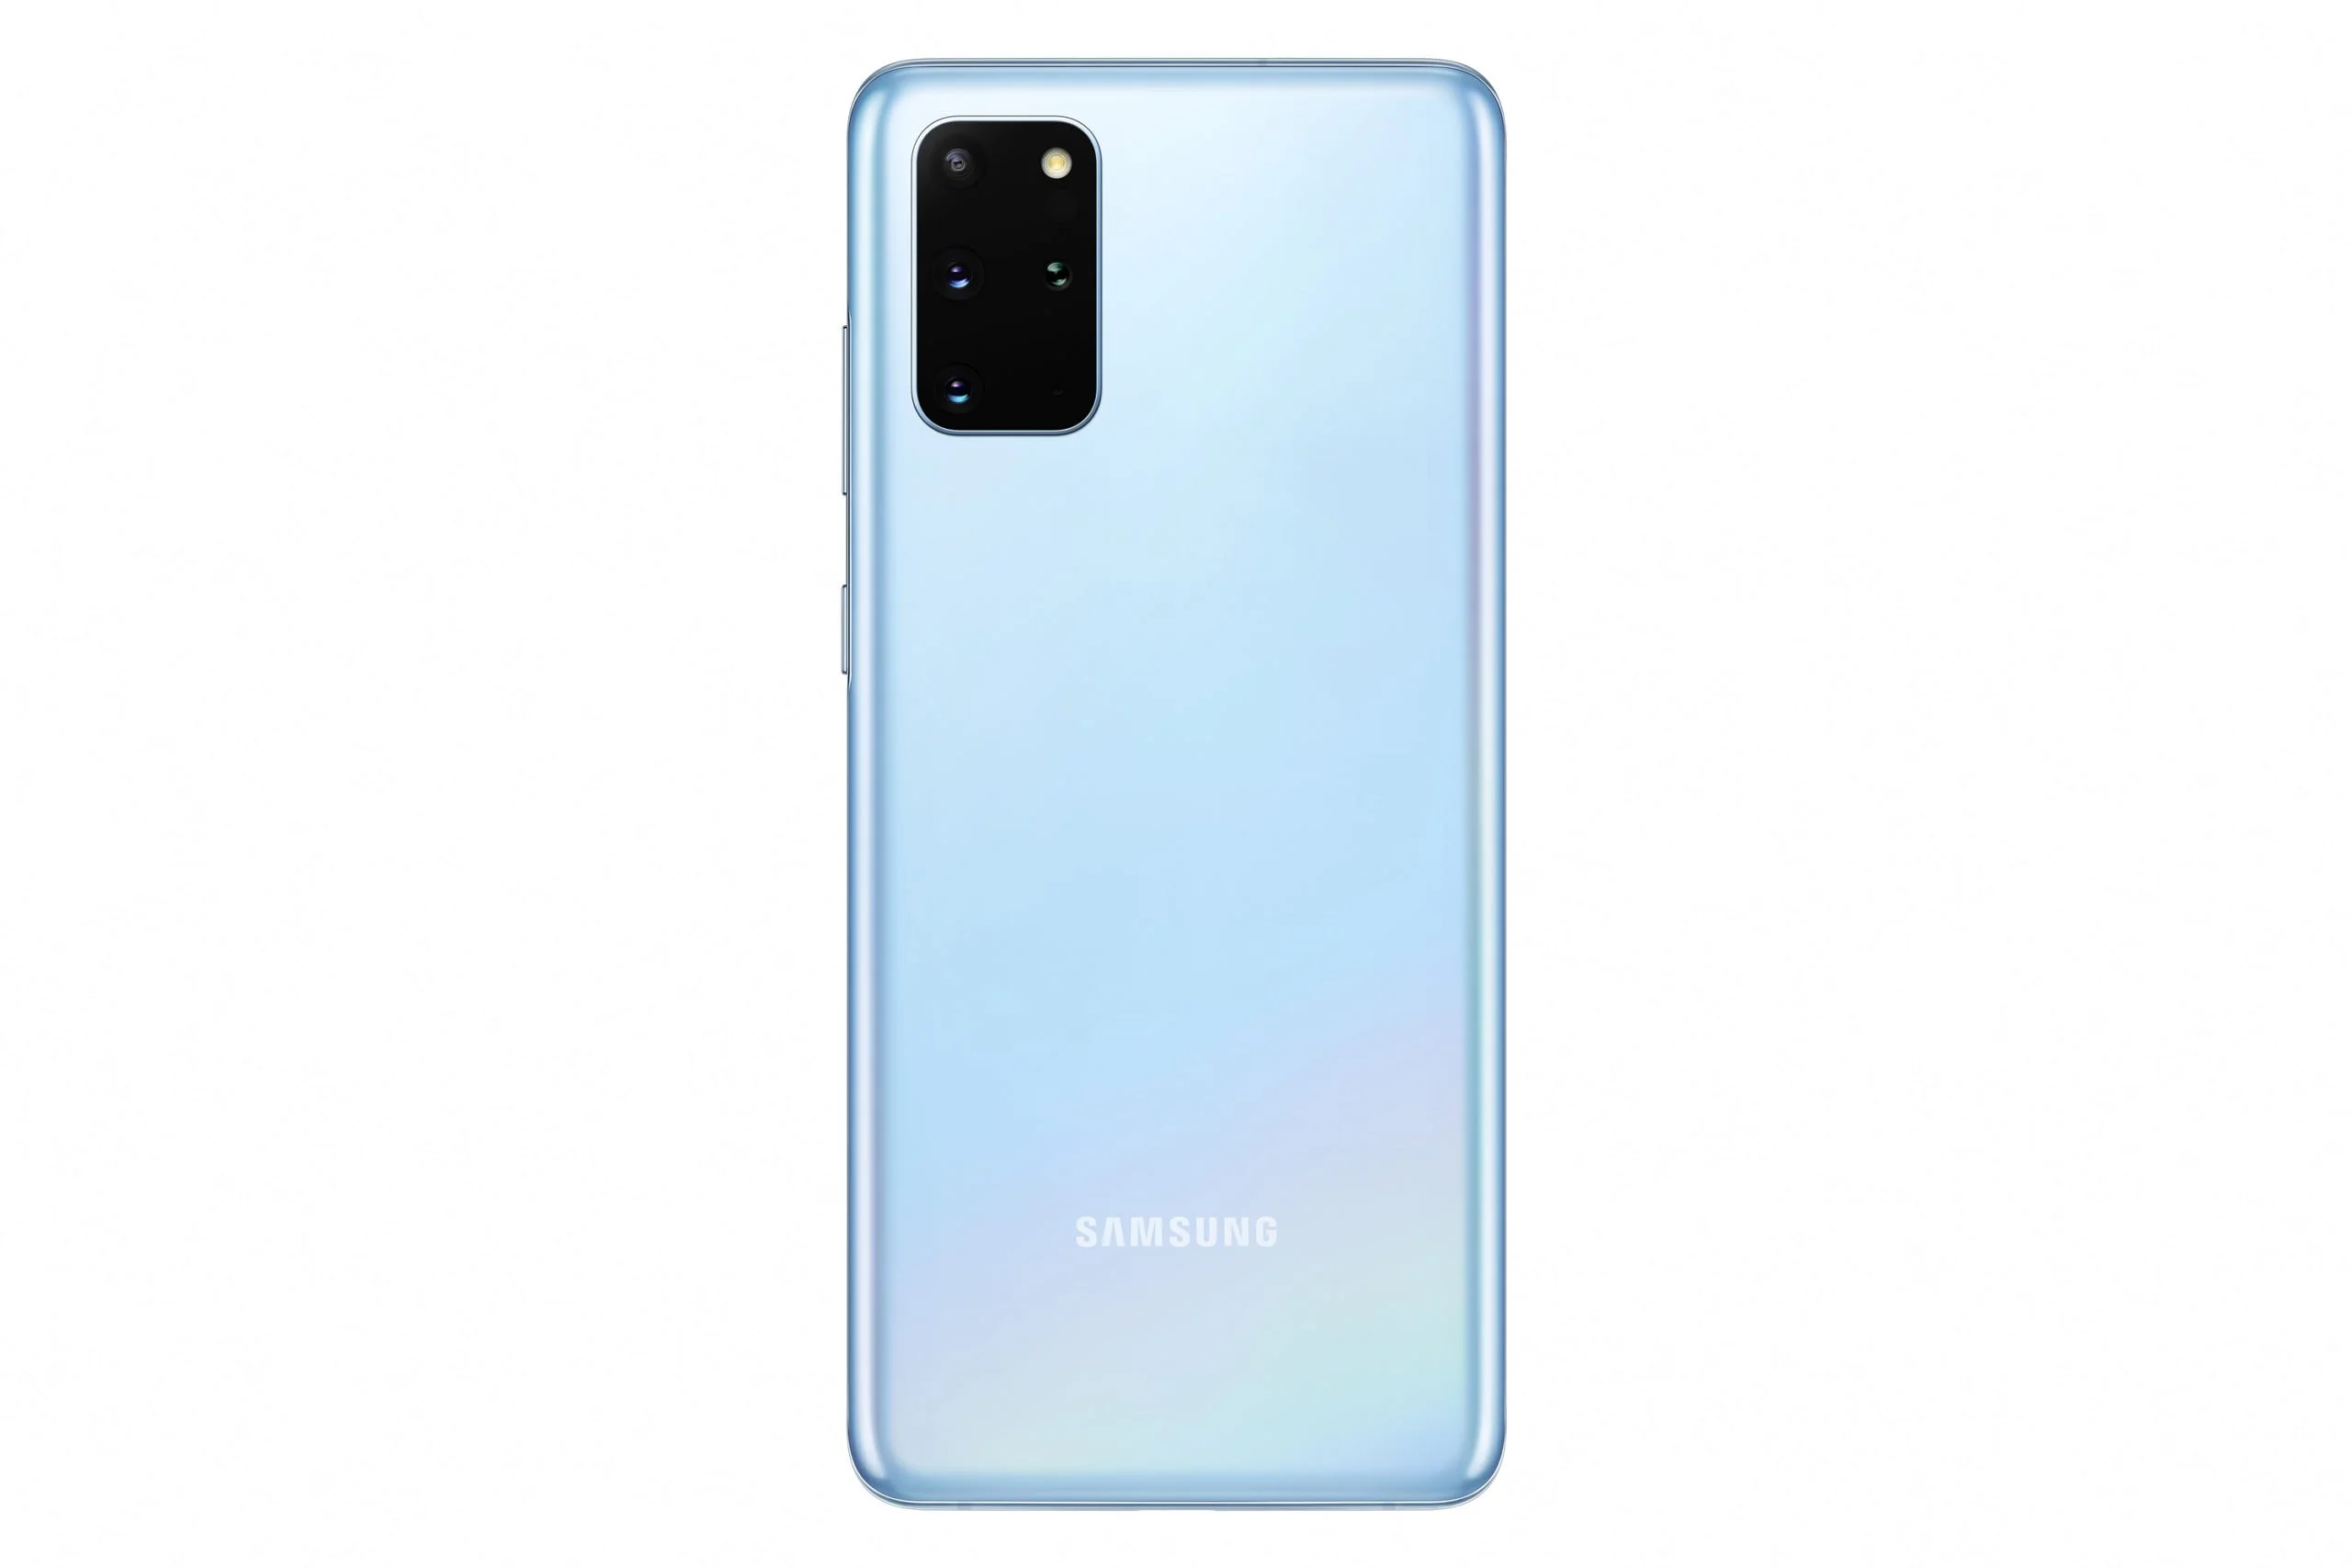 The Samsung Galaxy S20 series is Samsung’s first, full 5G flagship lineup, featuring unprecedented 5G and AI camera technologies, built for the future of communications.